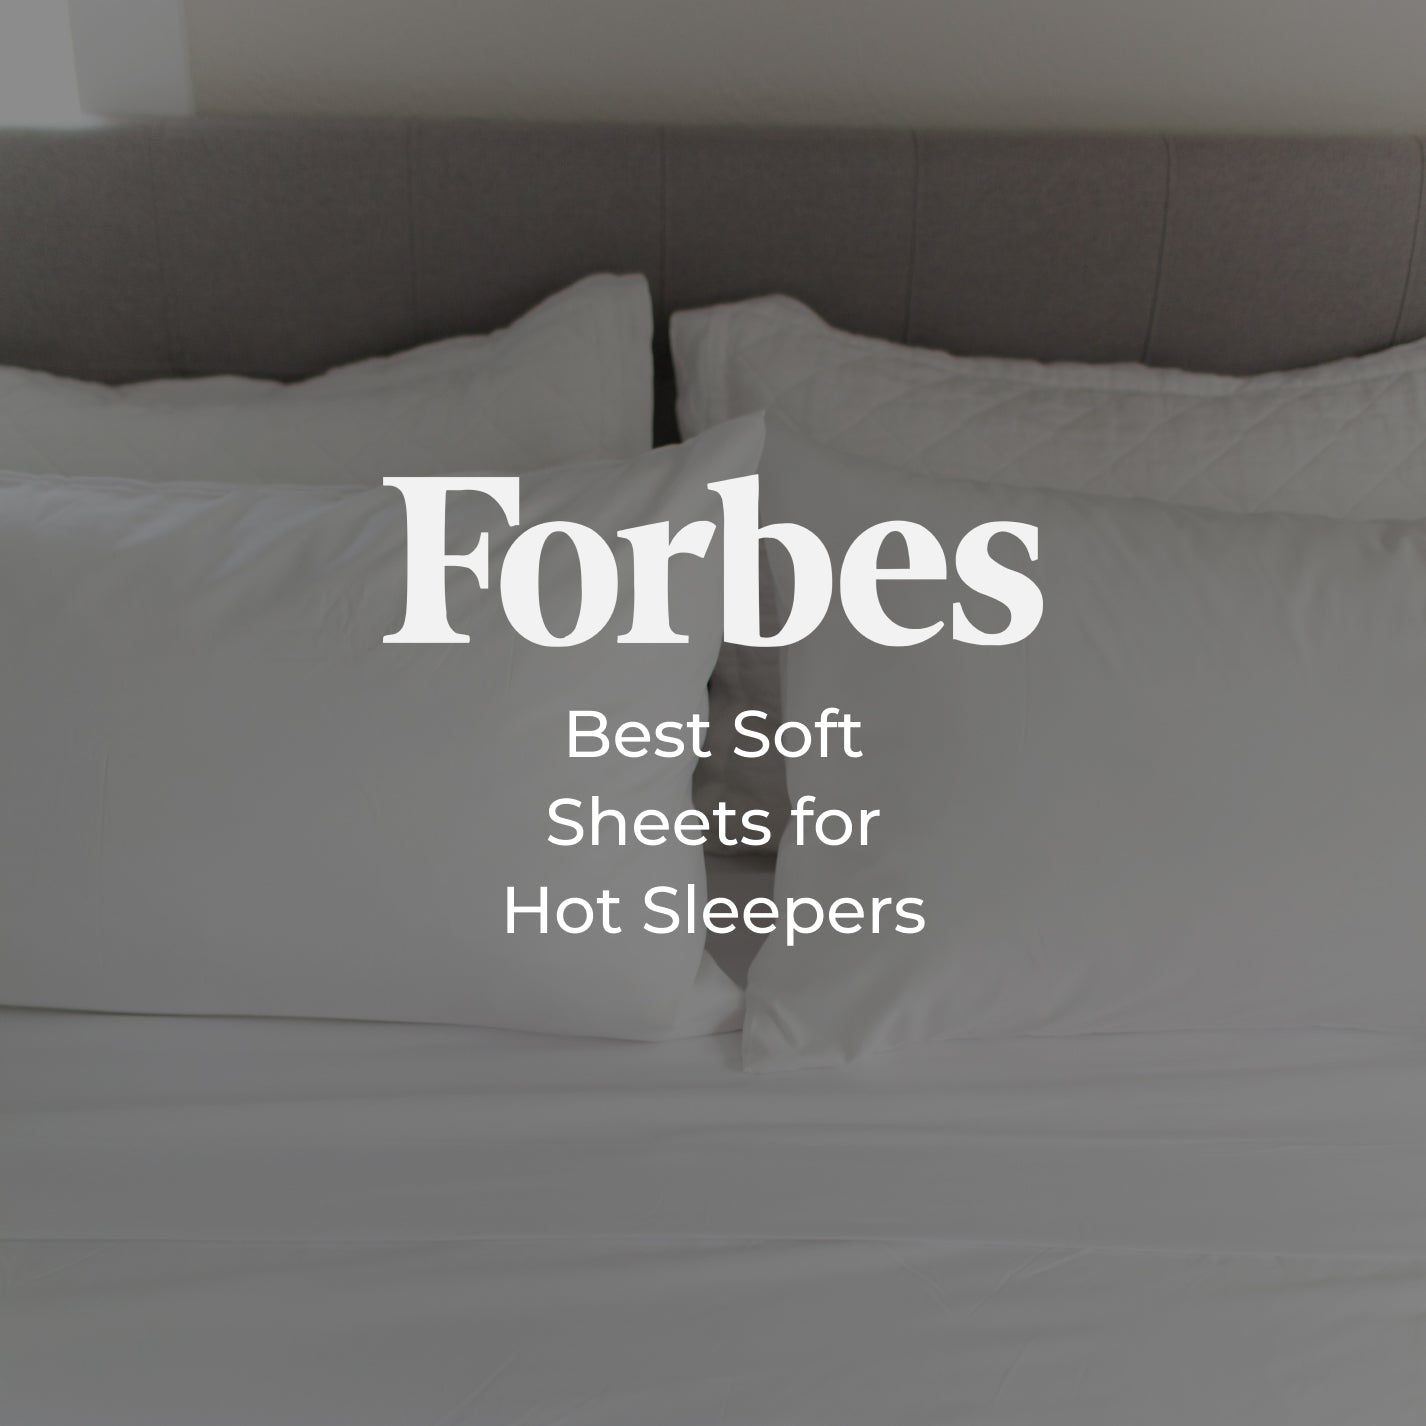 Forbes 2023 “Best Soft Sheets for Hot Sleepers"